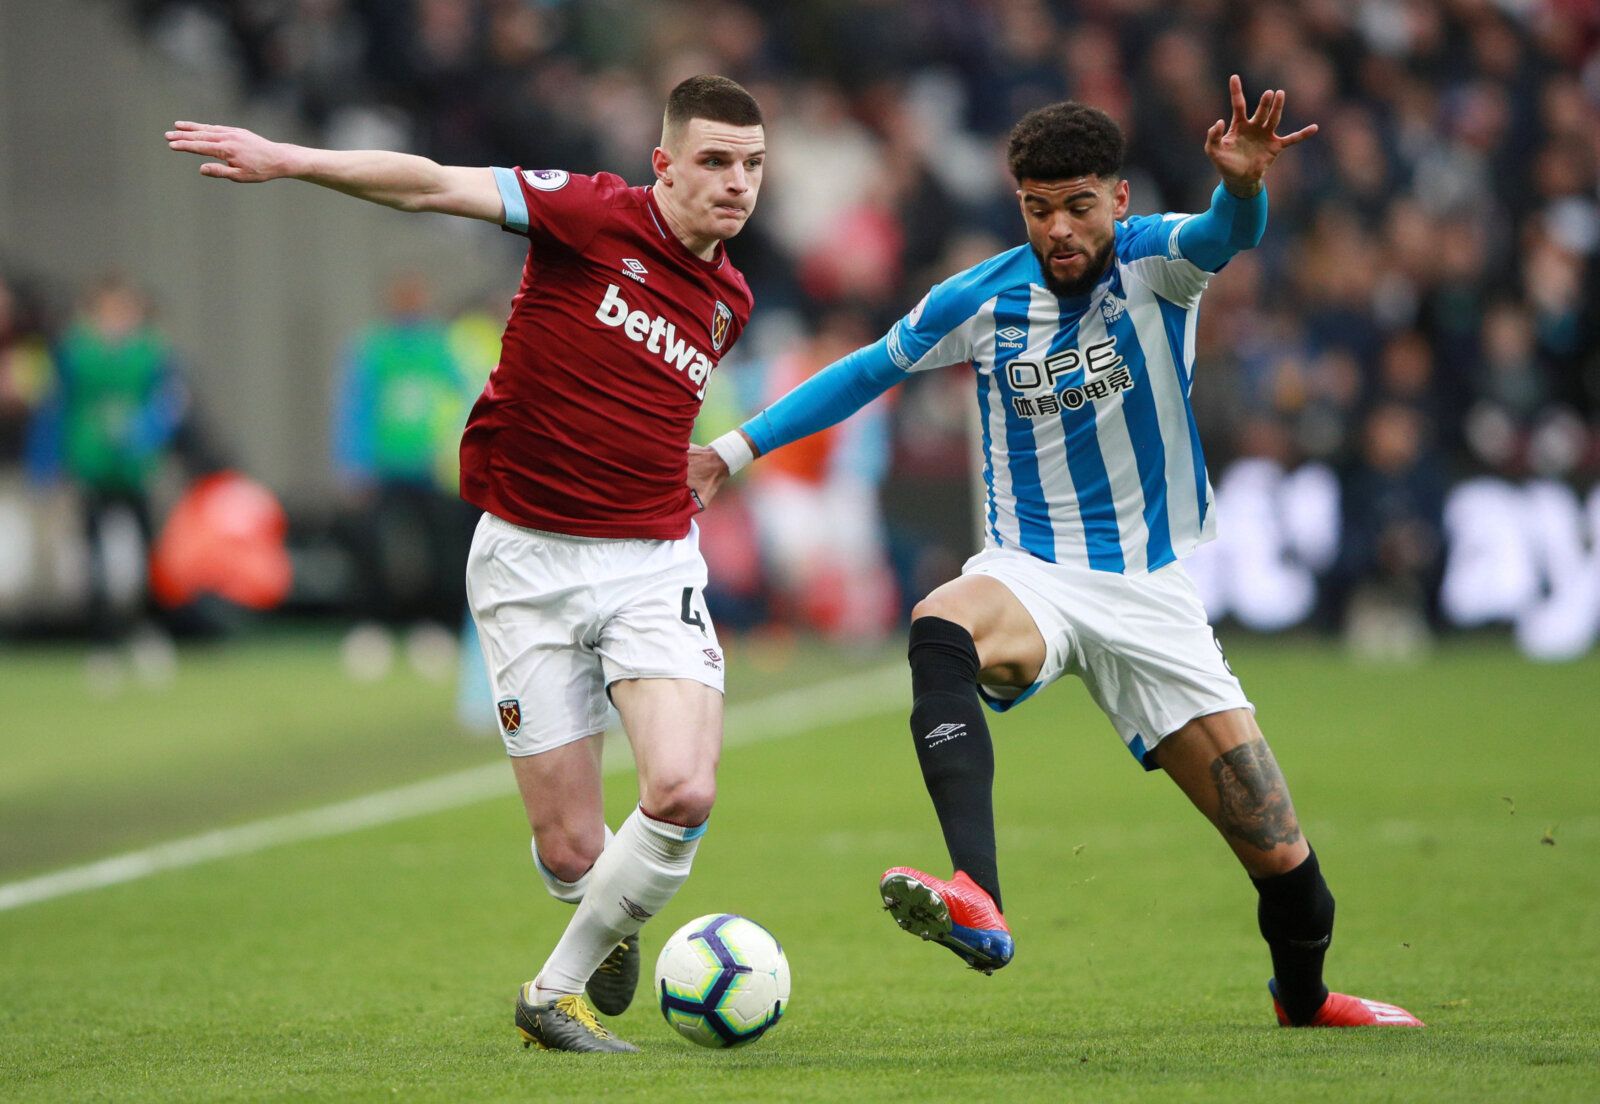 Soccer Football - Premier League - West Ham United v Huddersfield Town - London Stadium, London, Britain - March 16, 2019  Huddersfield Town's Philip Billing in action with West Ham's Declan Rice           REUTERS/Ian Walton  EDITORIAL USE ONLY. No use with unauthorized audio, video, data, fixture lists, club/league logos or 